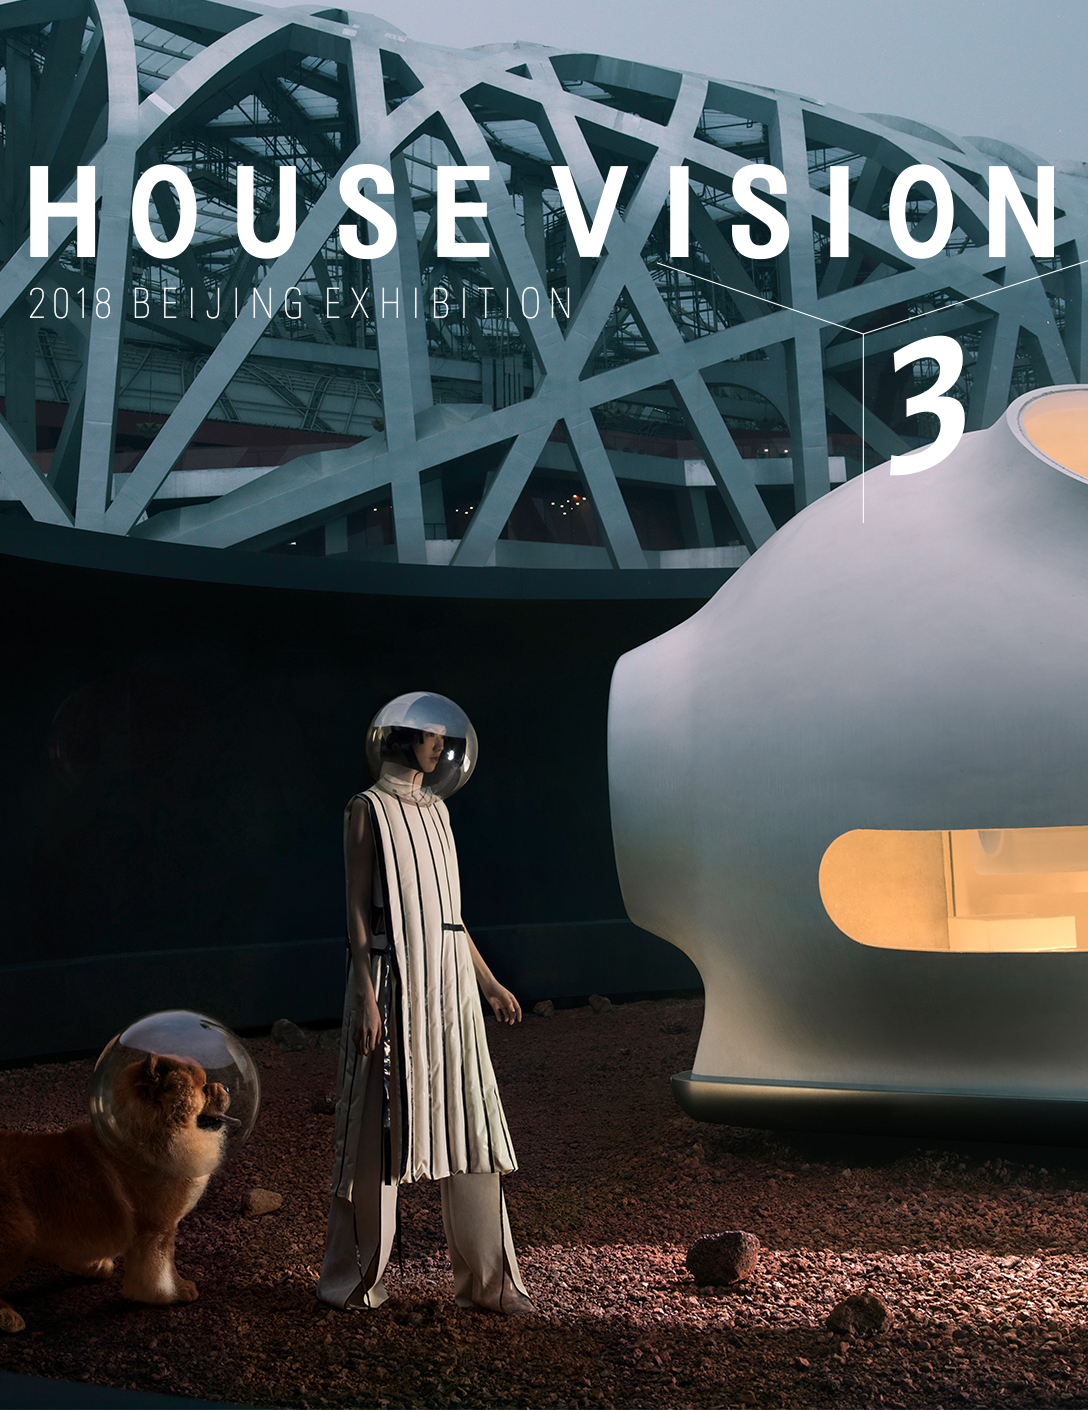 HOUSE VISION 2018 BEIJING EXHIBITION